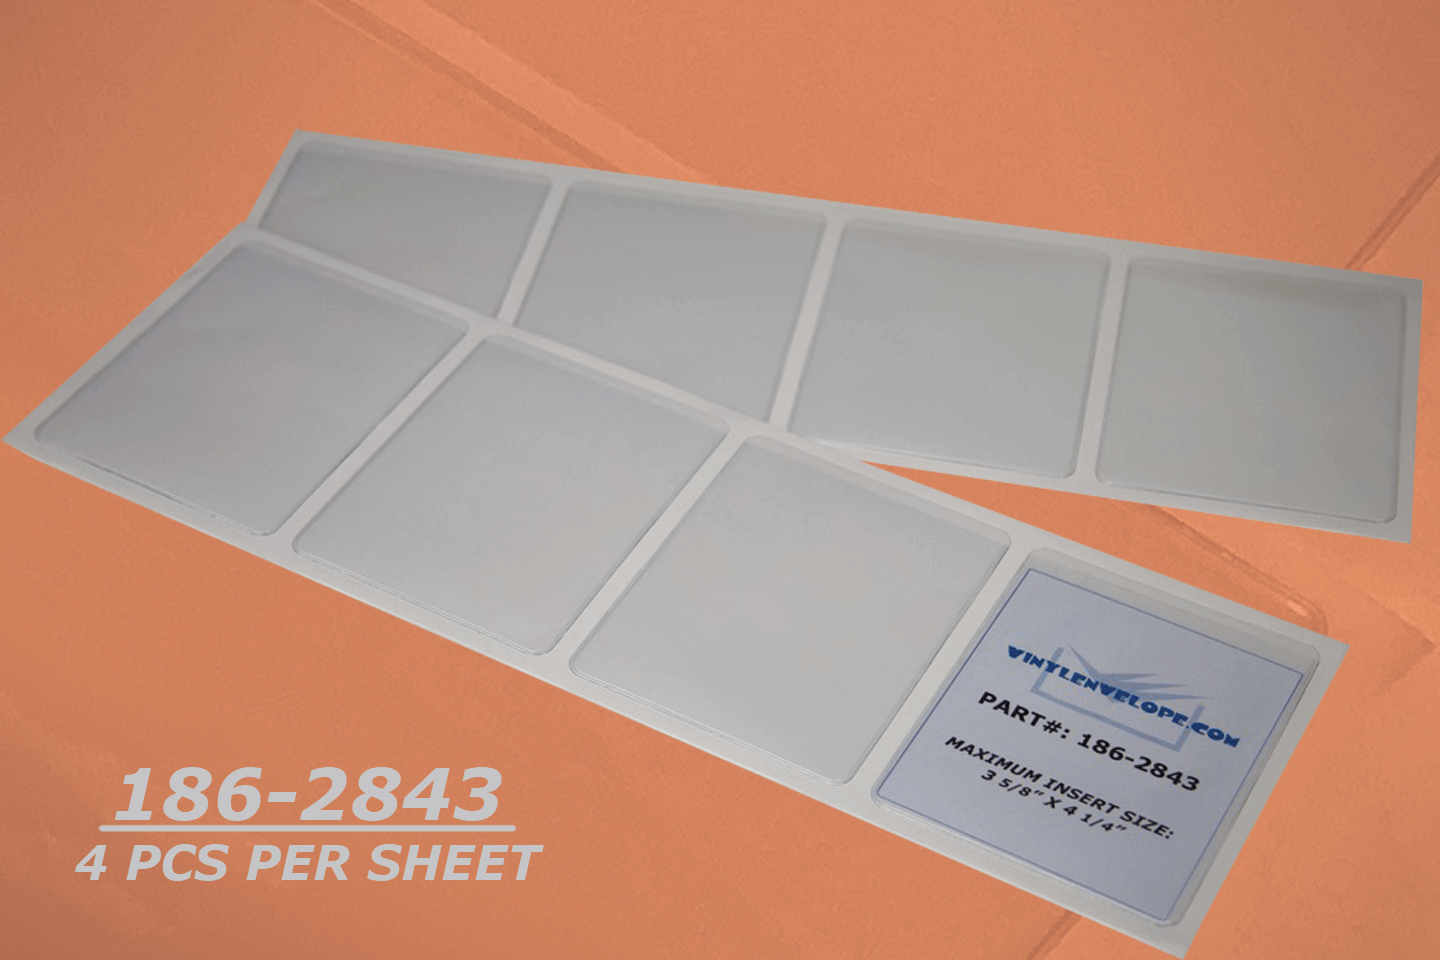 3 5/8" x 4 1/2" Adhesive Pouch